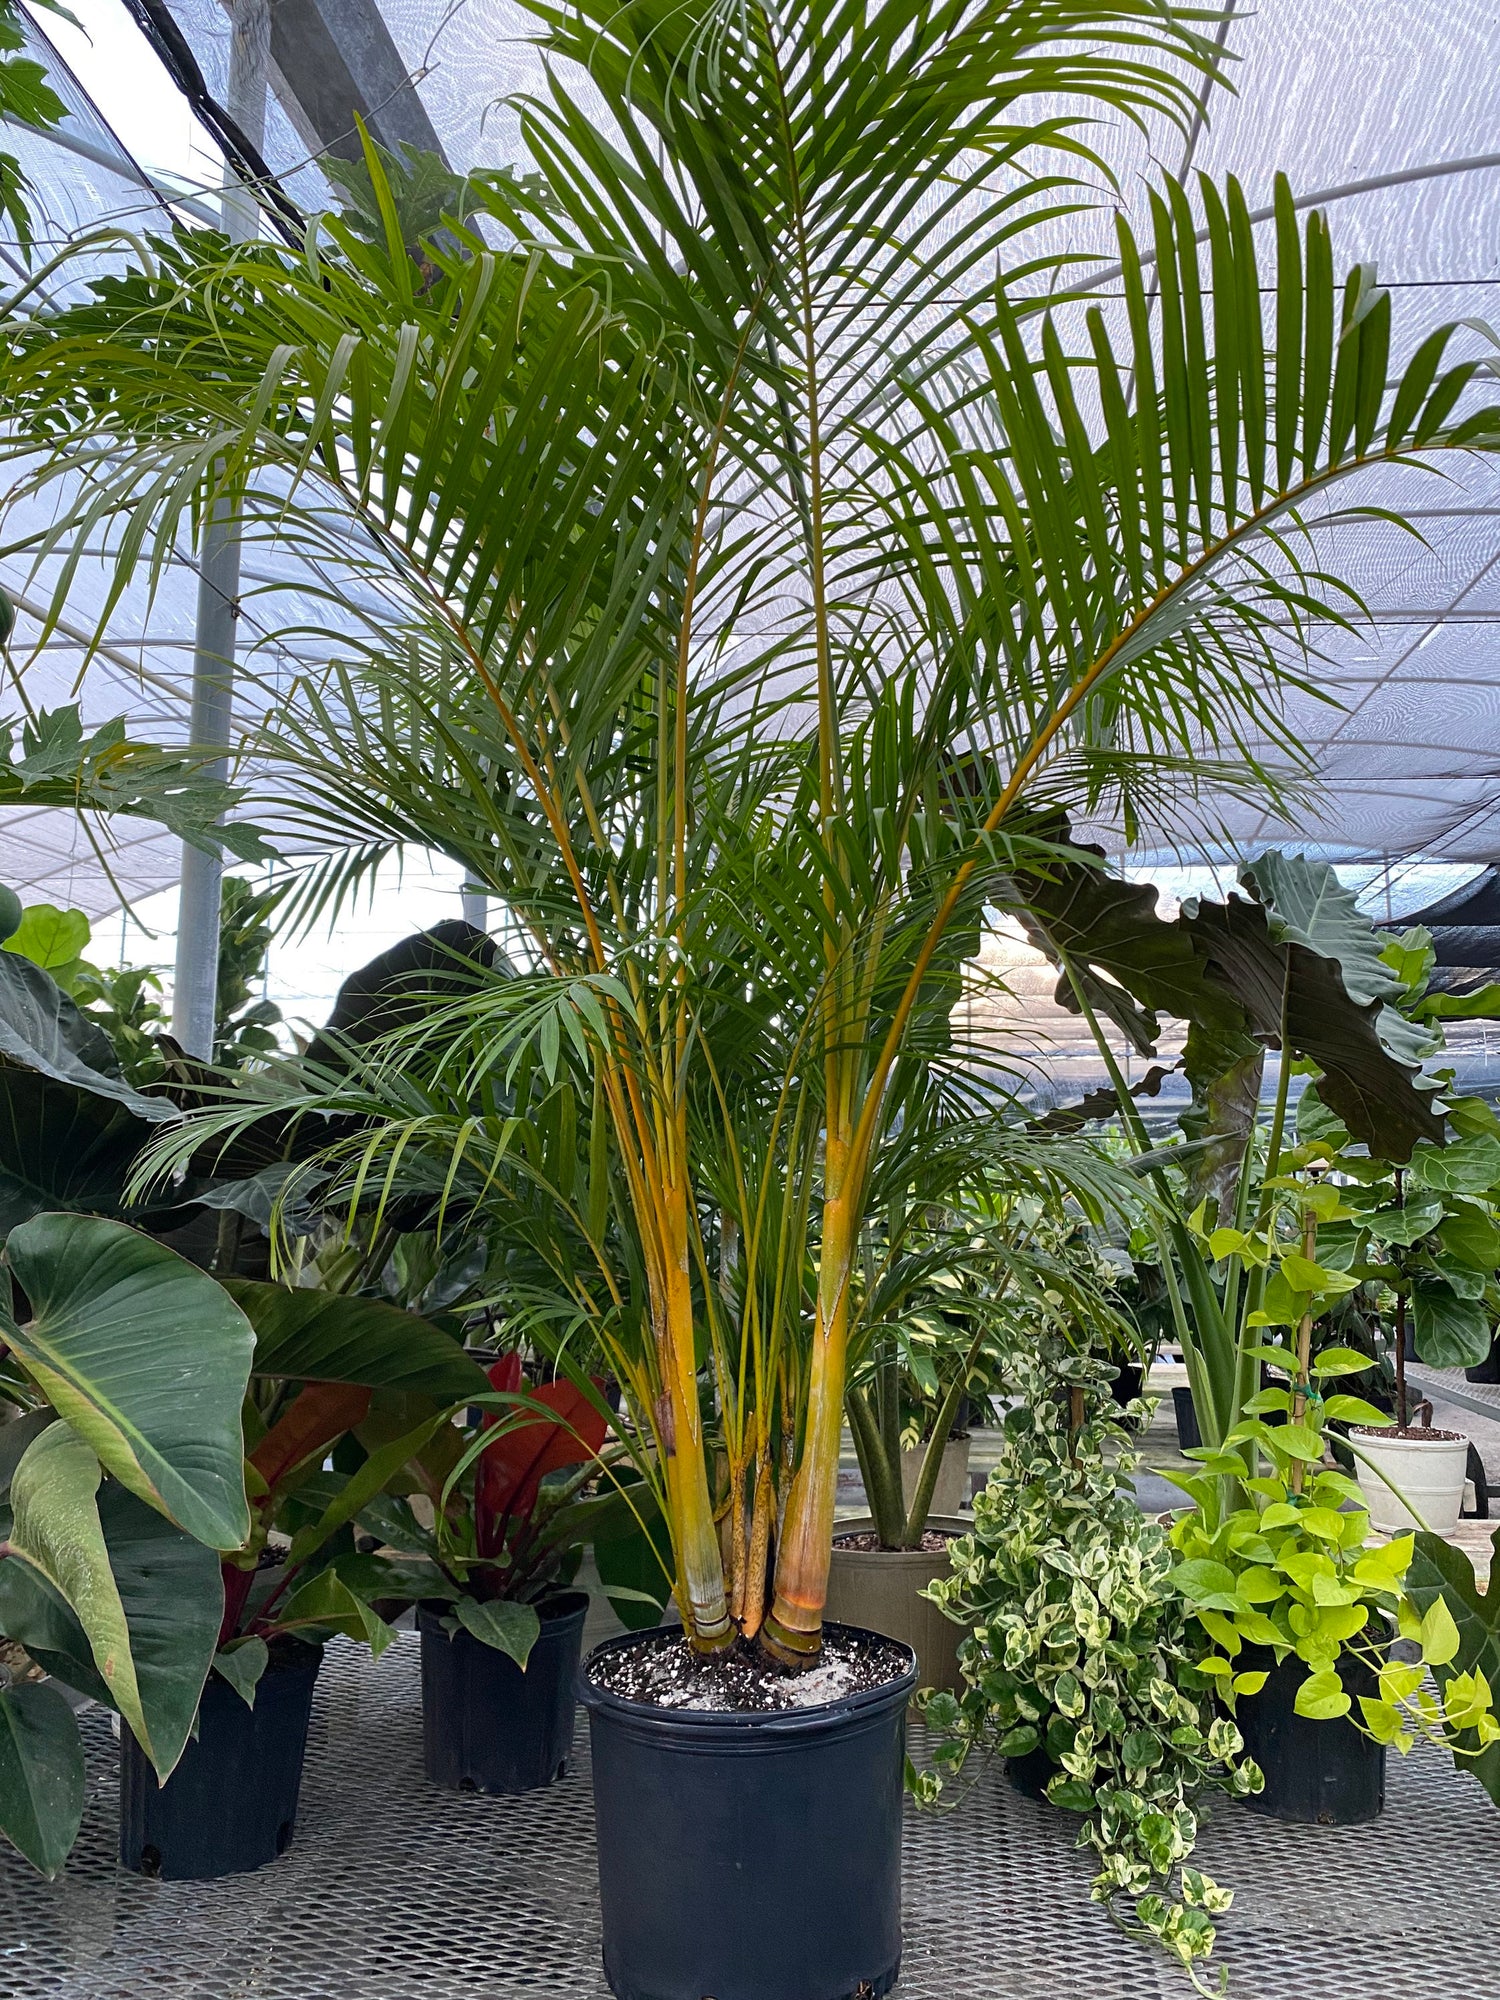 Areca Palm, Golden Cane, Dypsis Lutescens in a pot